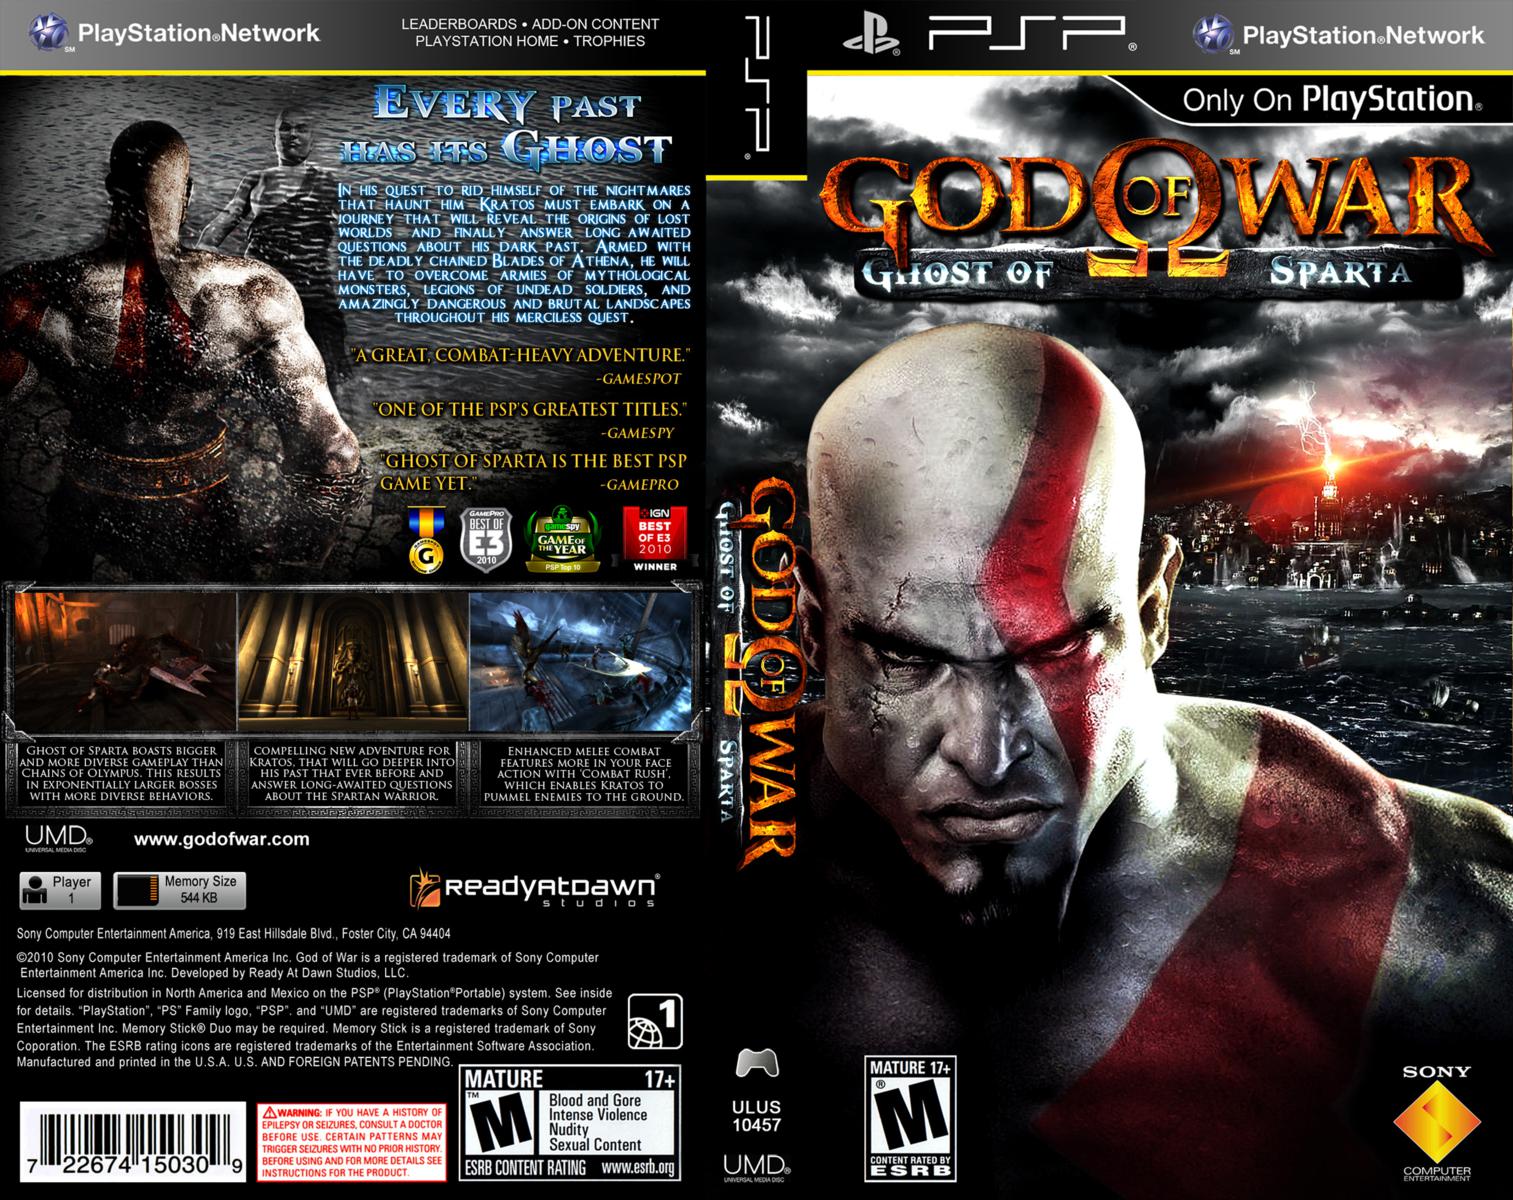 GameSpy: God of War: Ghost of Sparta Review - Page 1